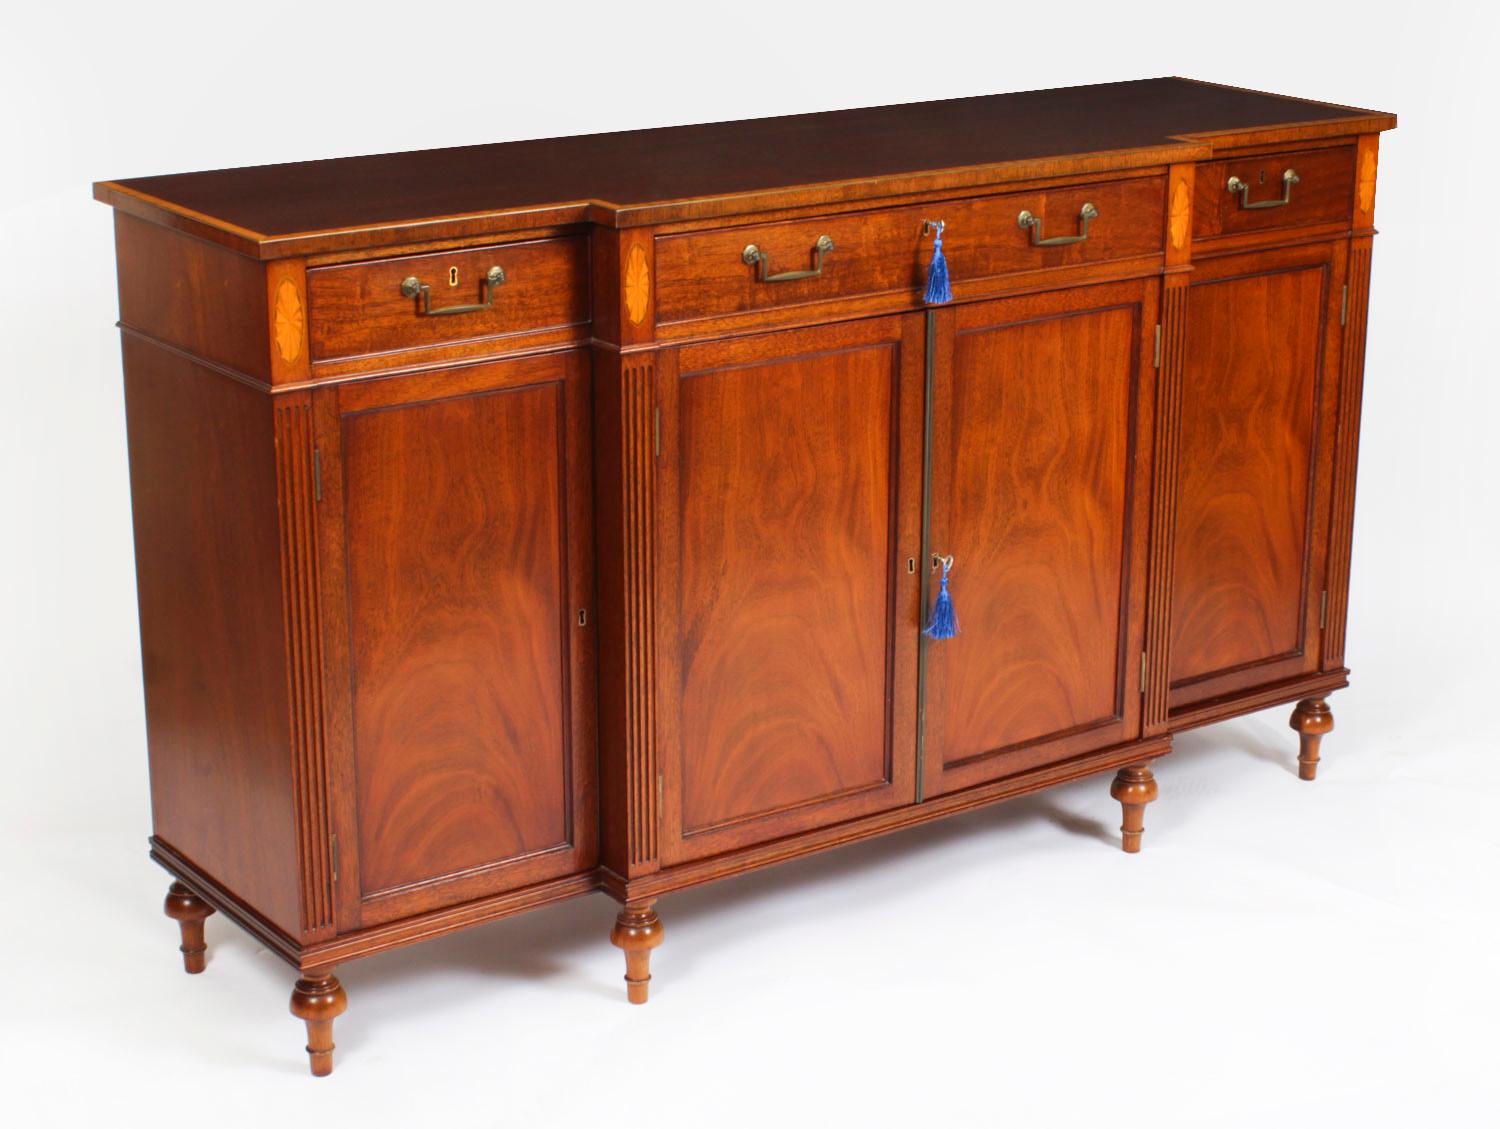 This is a fabulous pair of Vintage Regency Revival breakfront sideboards by the master cabinet maker William Tillman, circa 1980 in date.

Thet are made of stunning flame mahogany crossbanded in satinwood, fitted with drawers and cupboards and